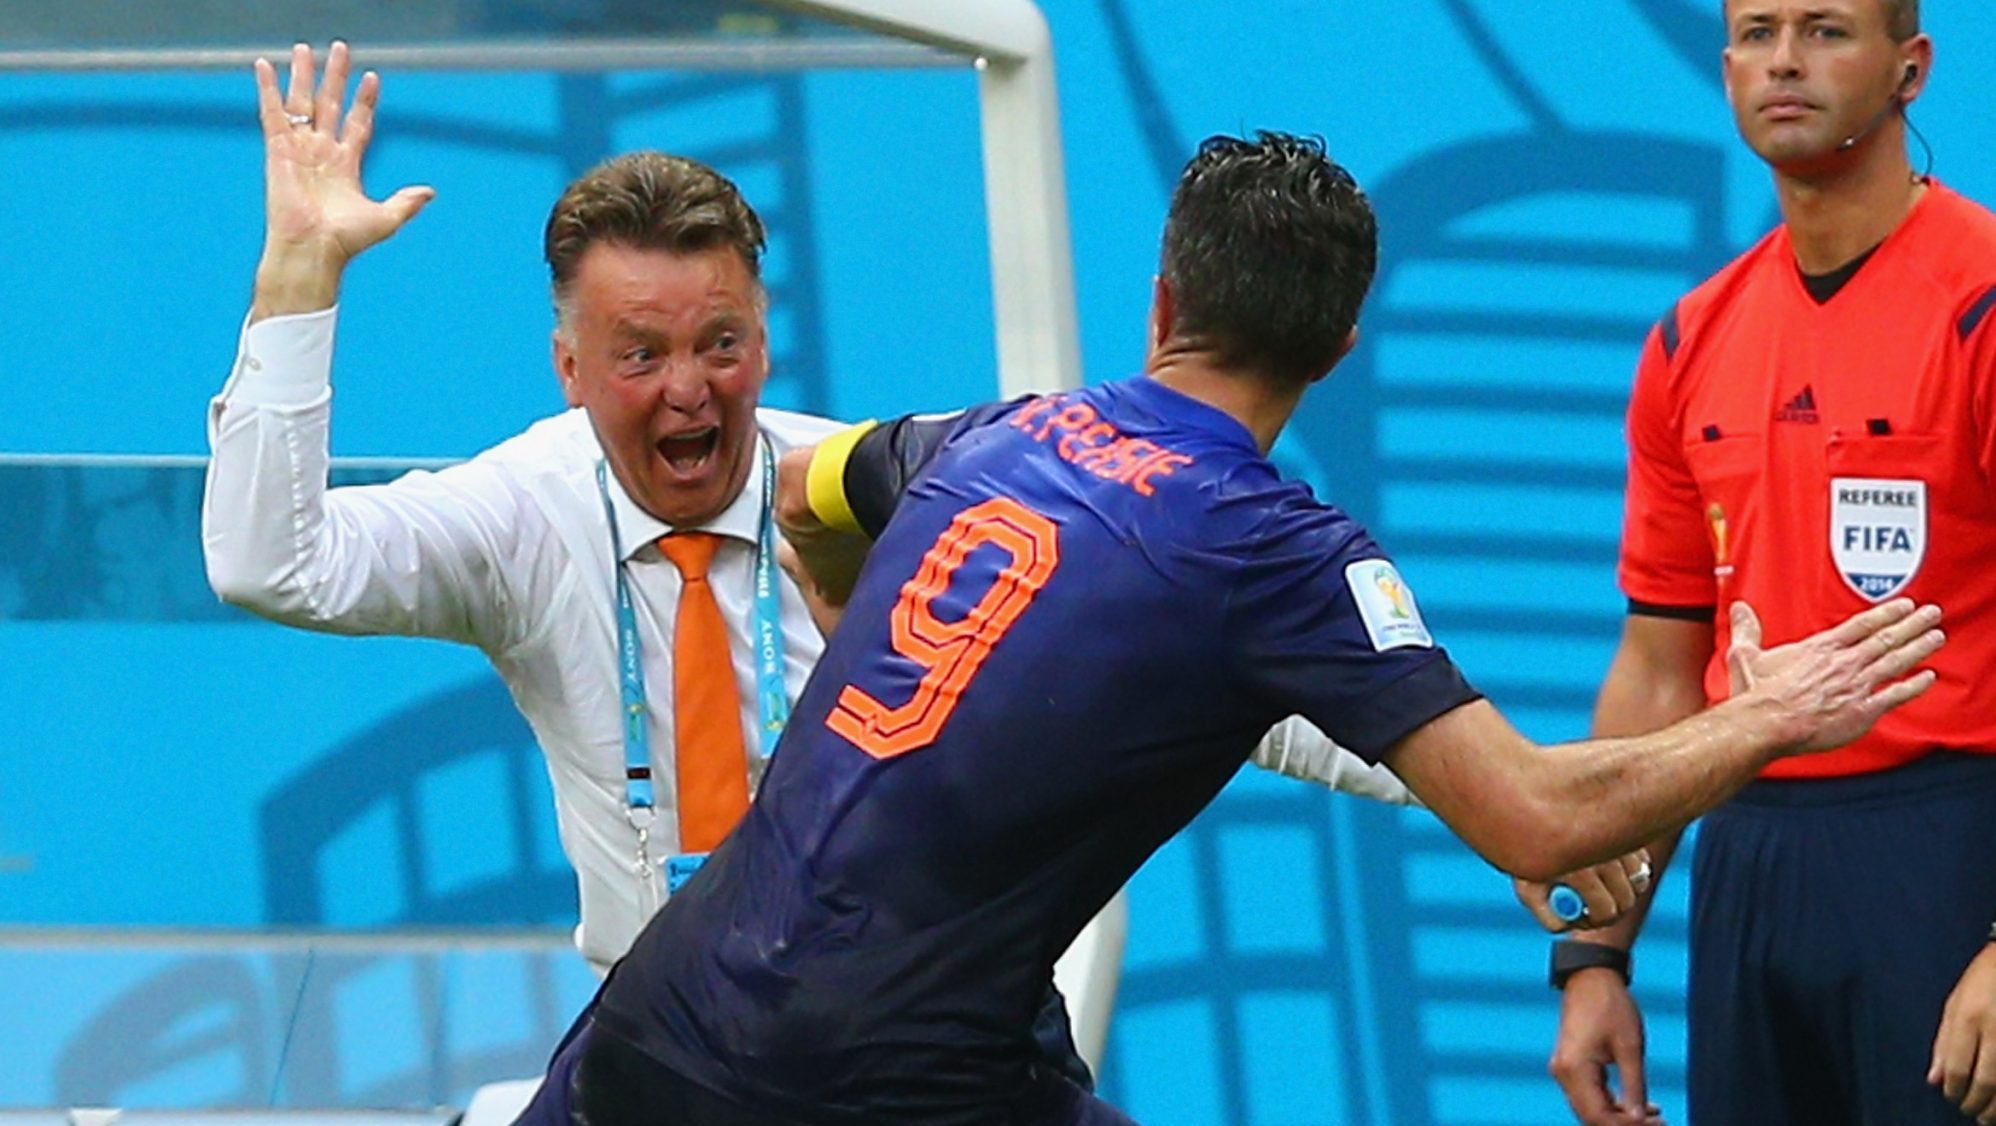 Louis van Gaal celebrates with Robin van Persie of the Netherlands during the 2014 World Cup finals. The Dutch came third in the tournament but have failed to qualify for the 2016 Euros and 2018 World Cup sincePhoto: Dean Mouhtaropoulos/Getty Images